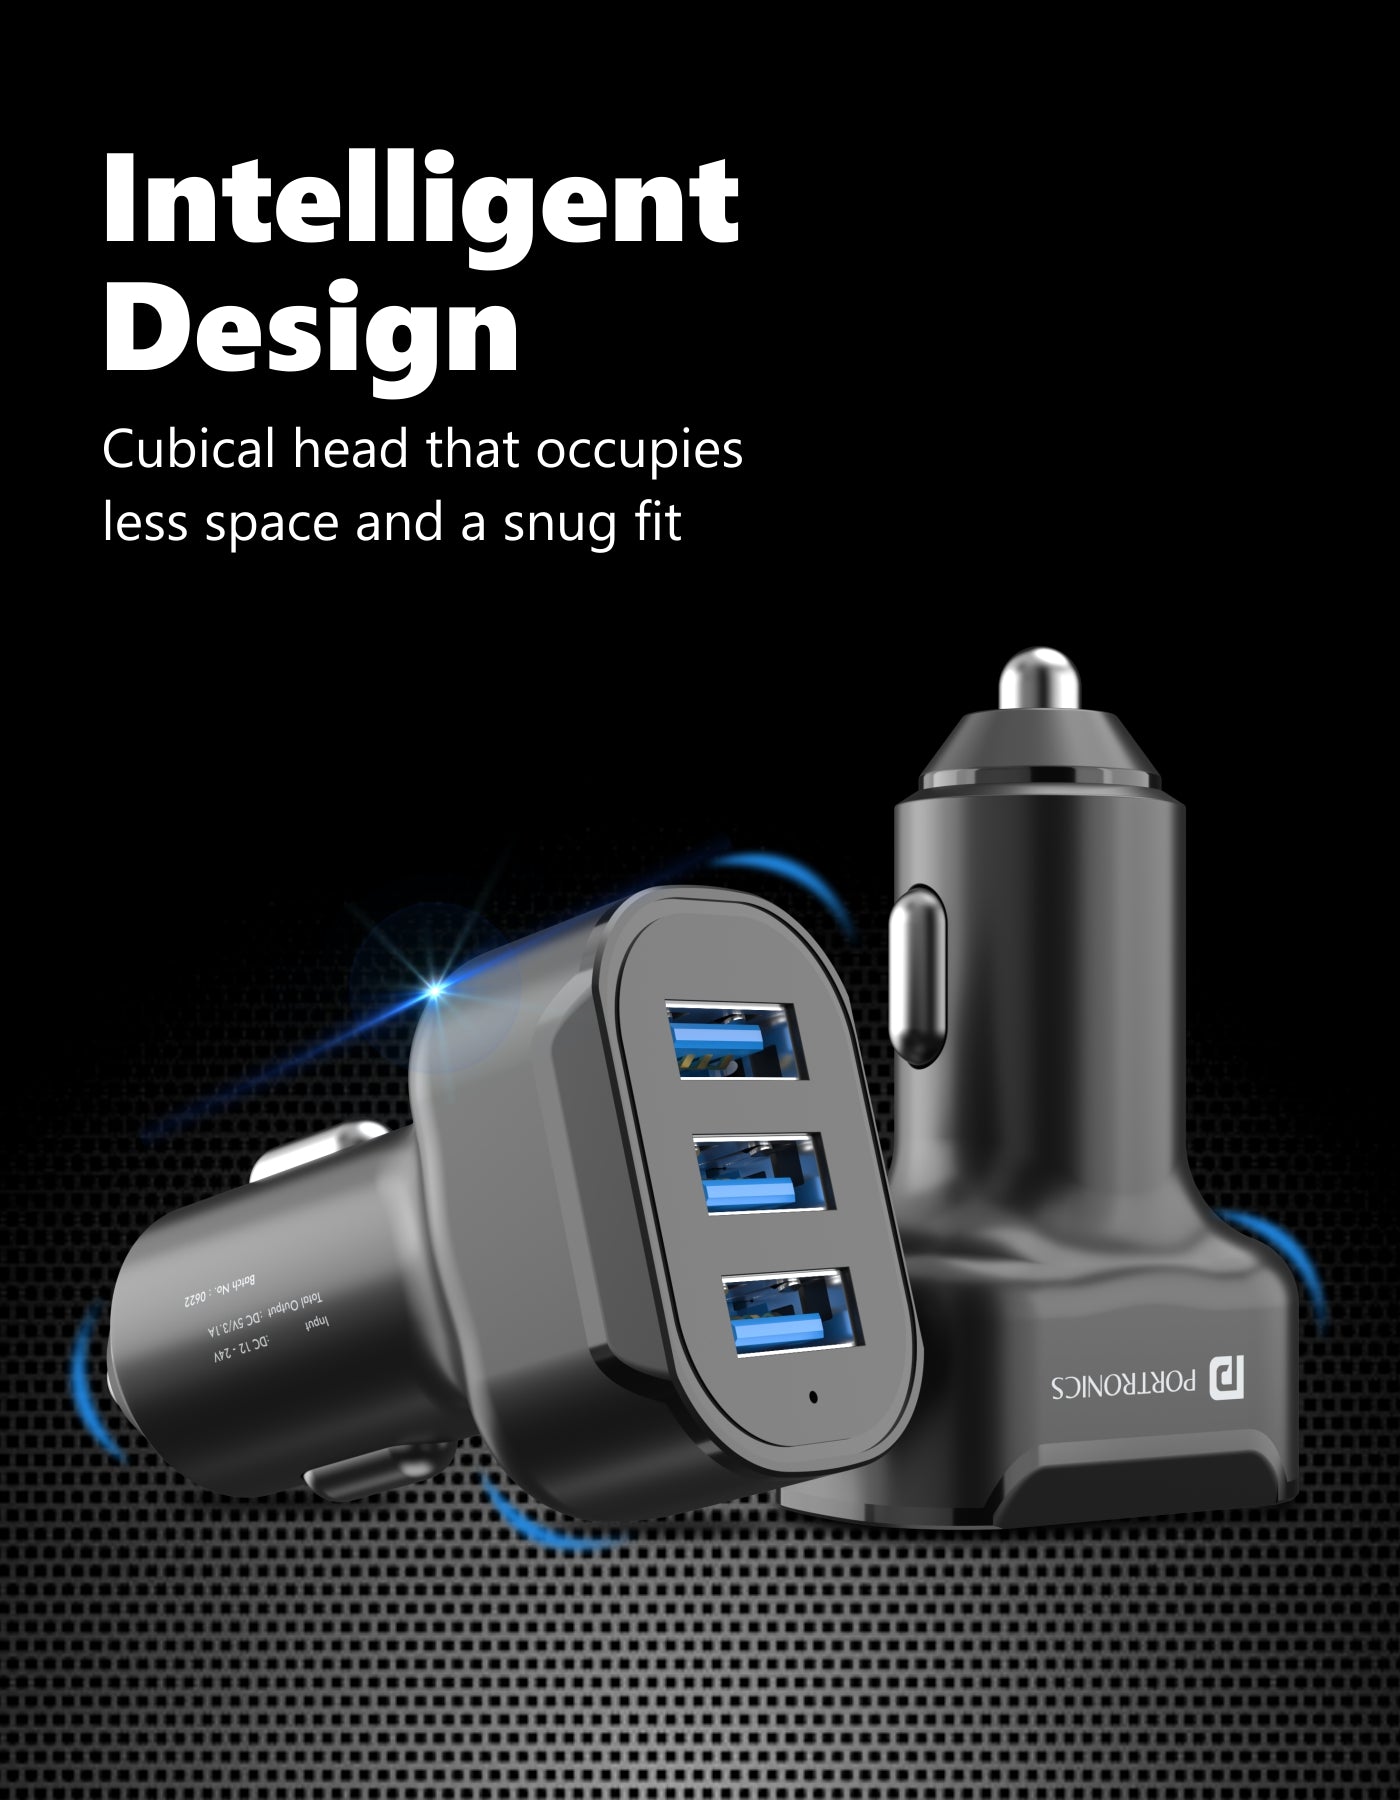 Portronics Car Power 11 car charger with 3 USB ports Cubical head that occupies less space and a snug fit